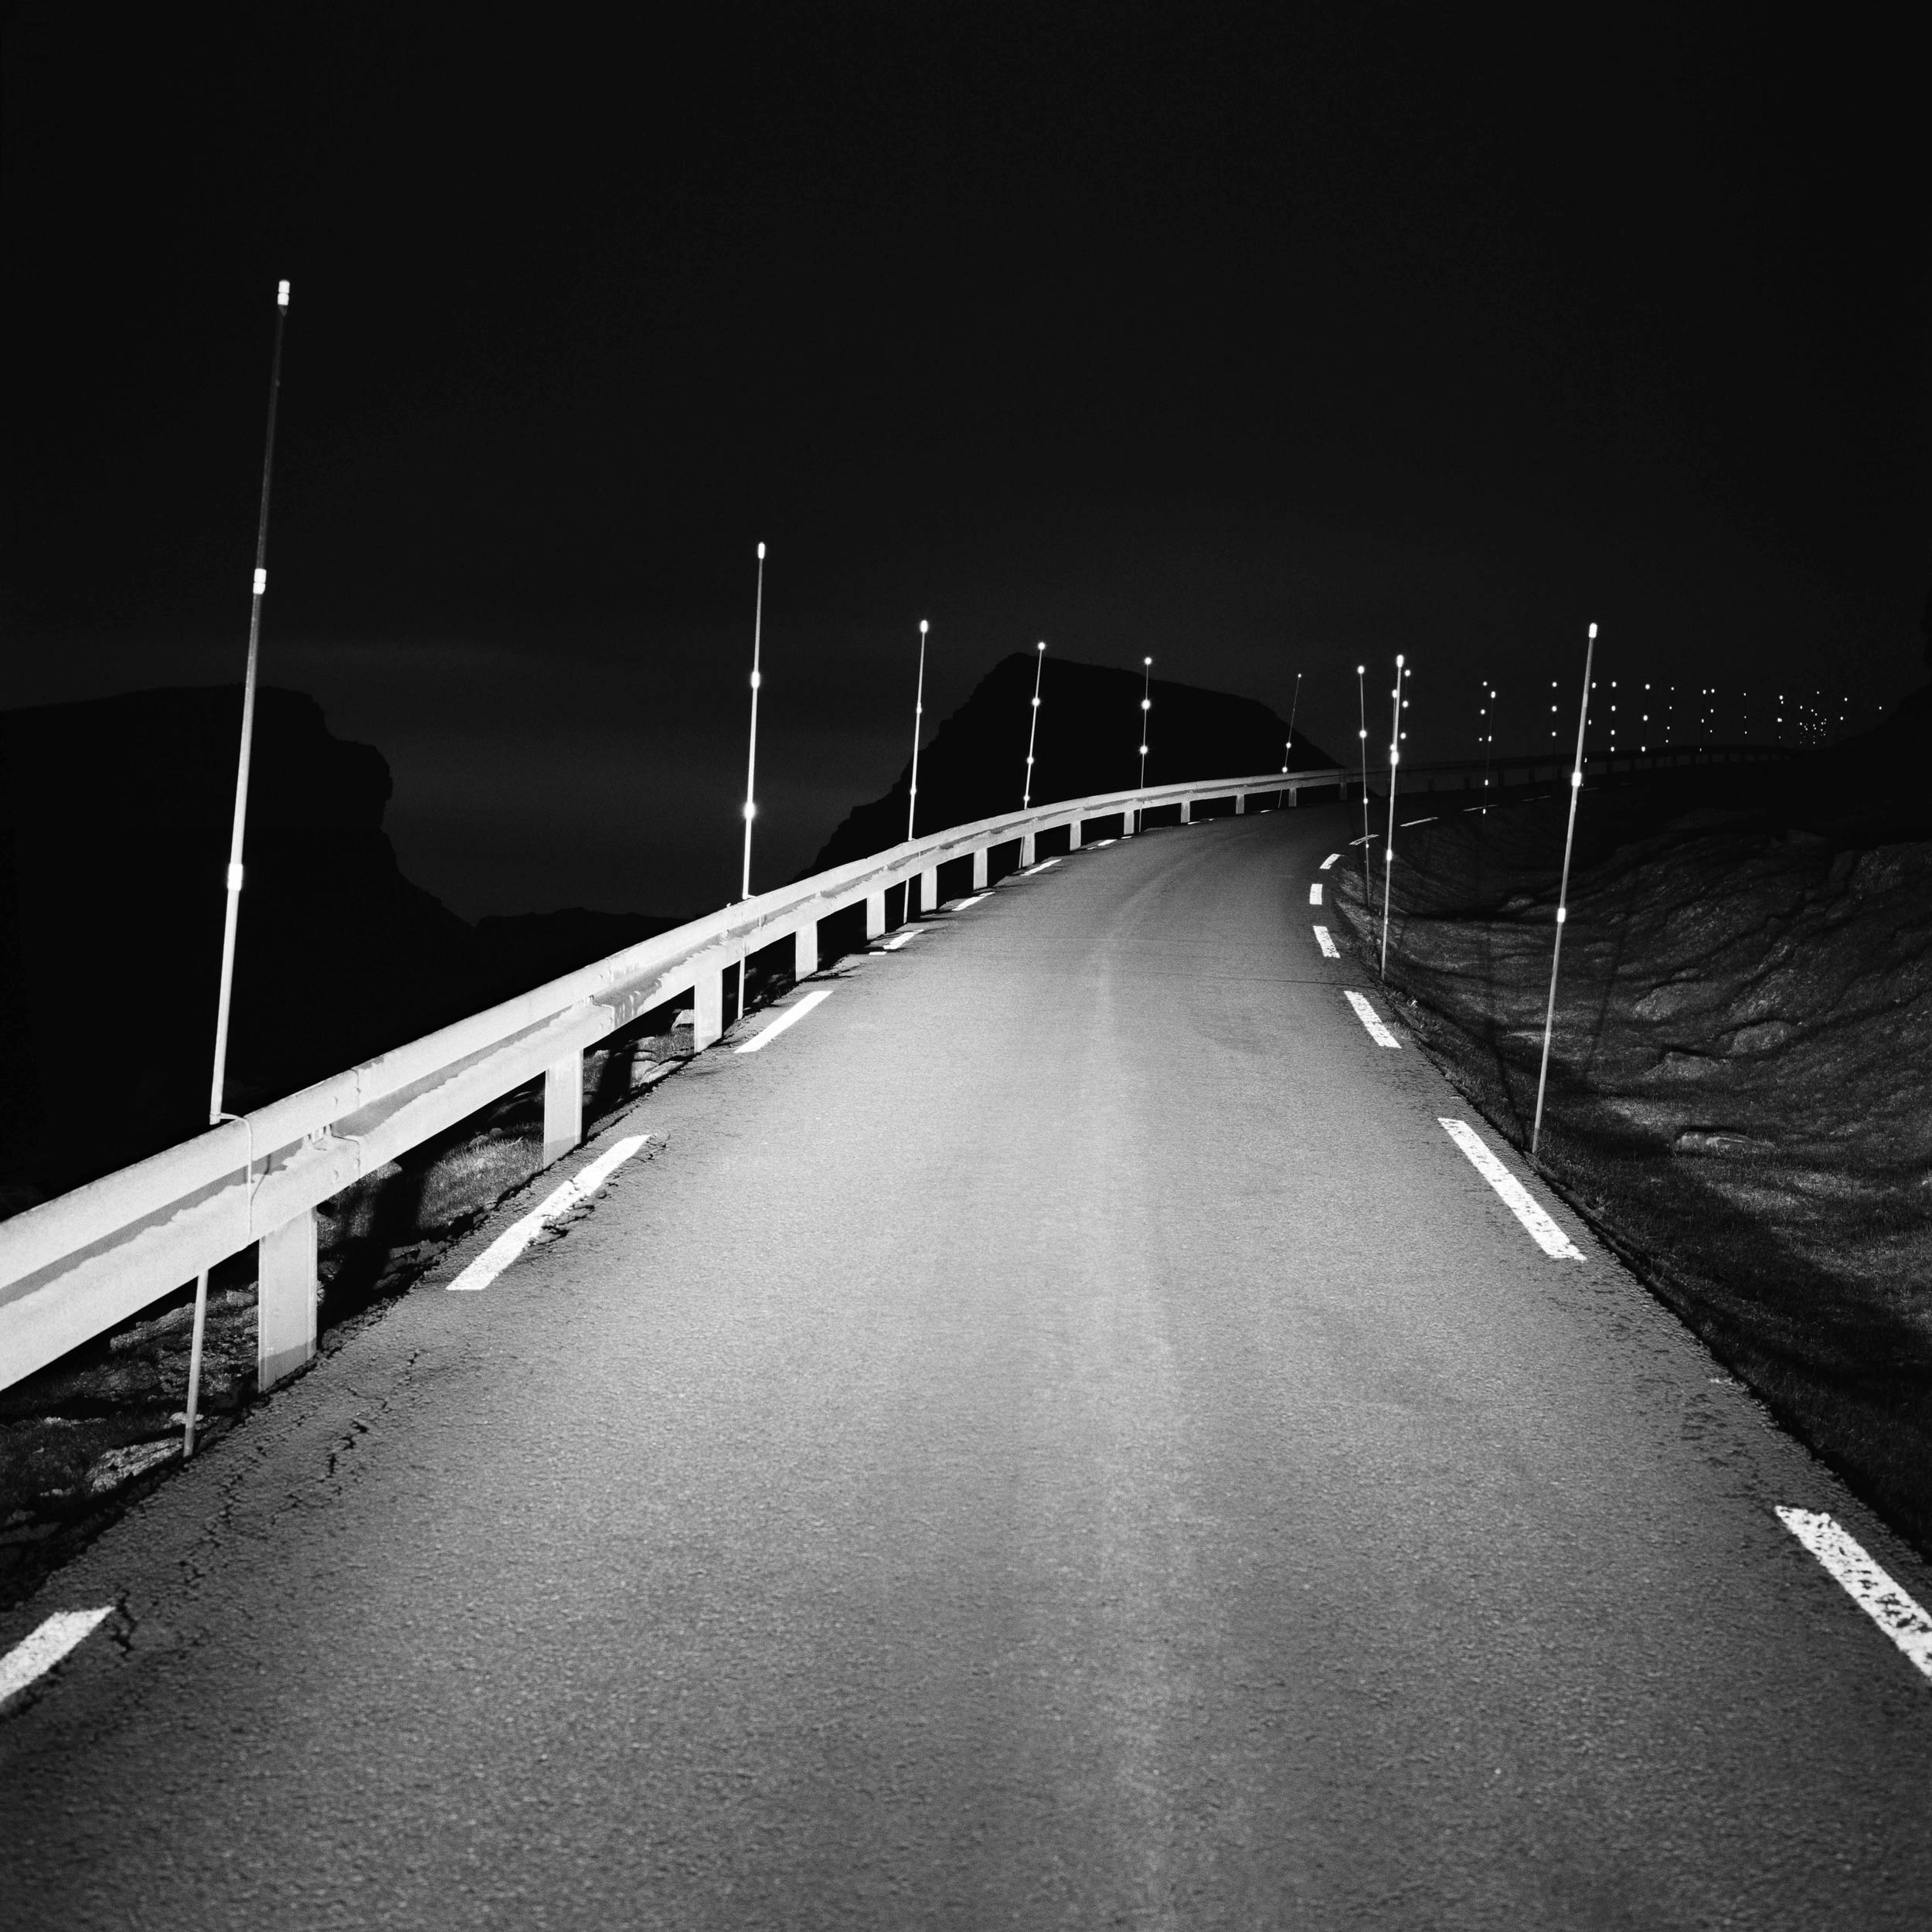 Highway into the night, let’s begin, this journey we are in, Faroe Island, 2015